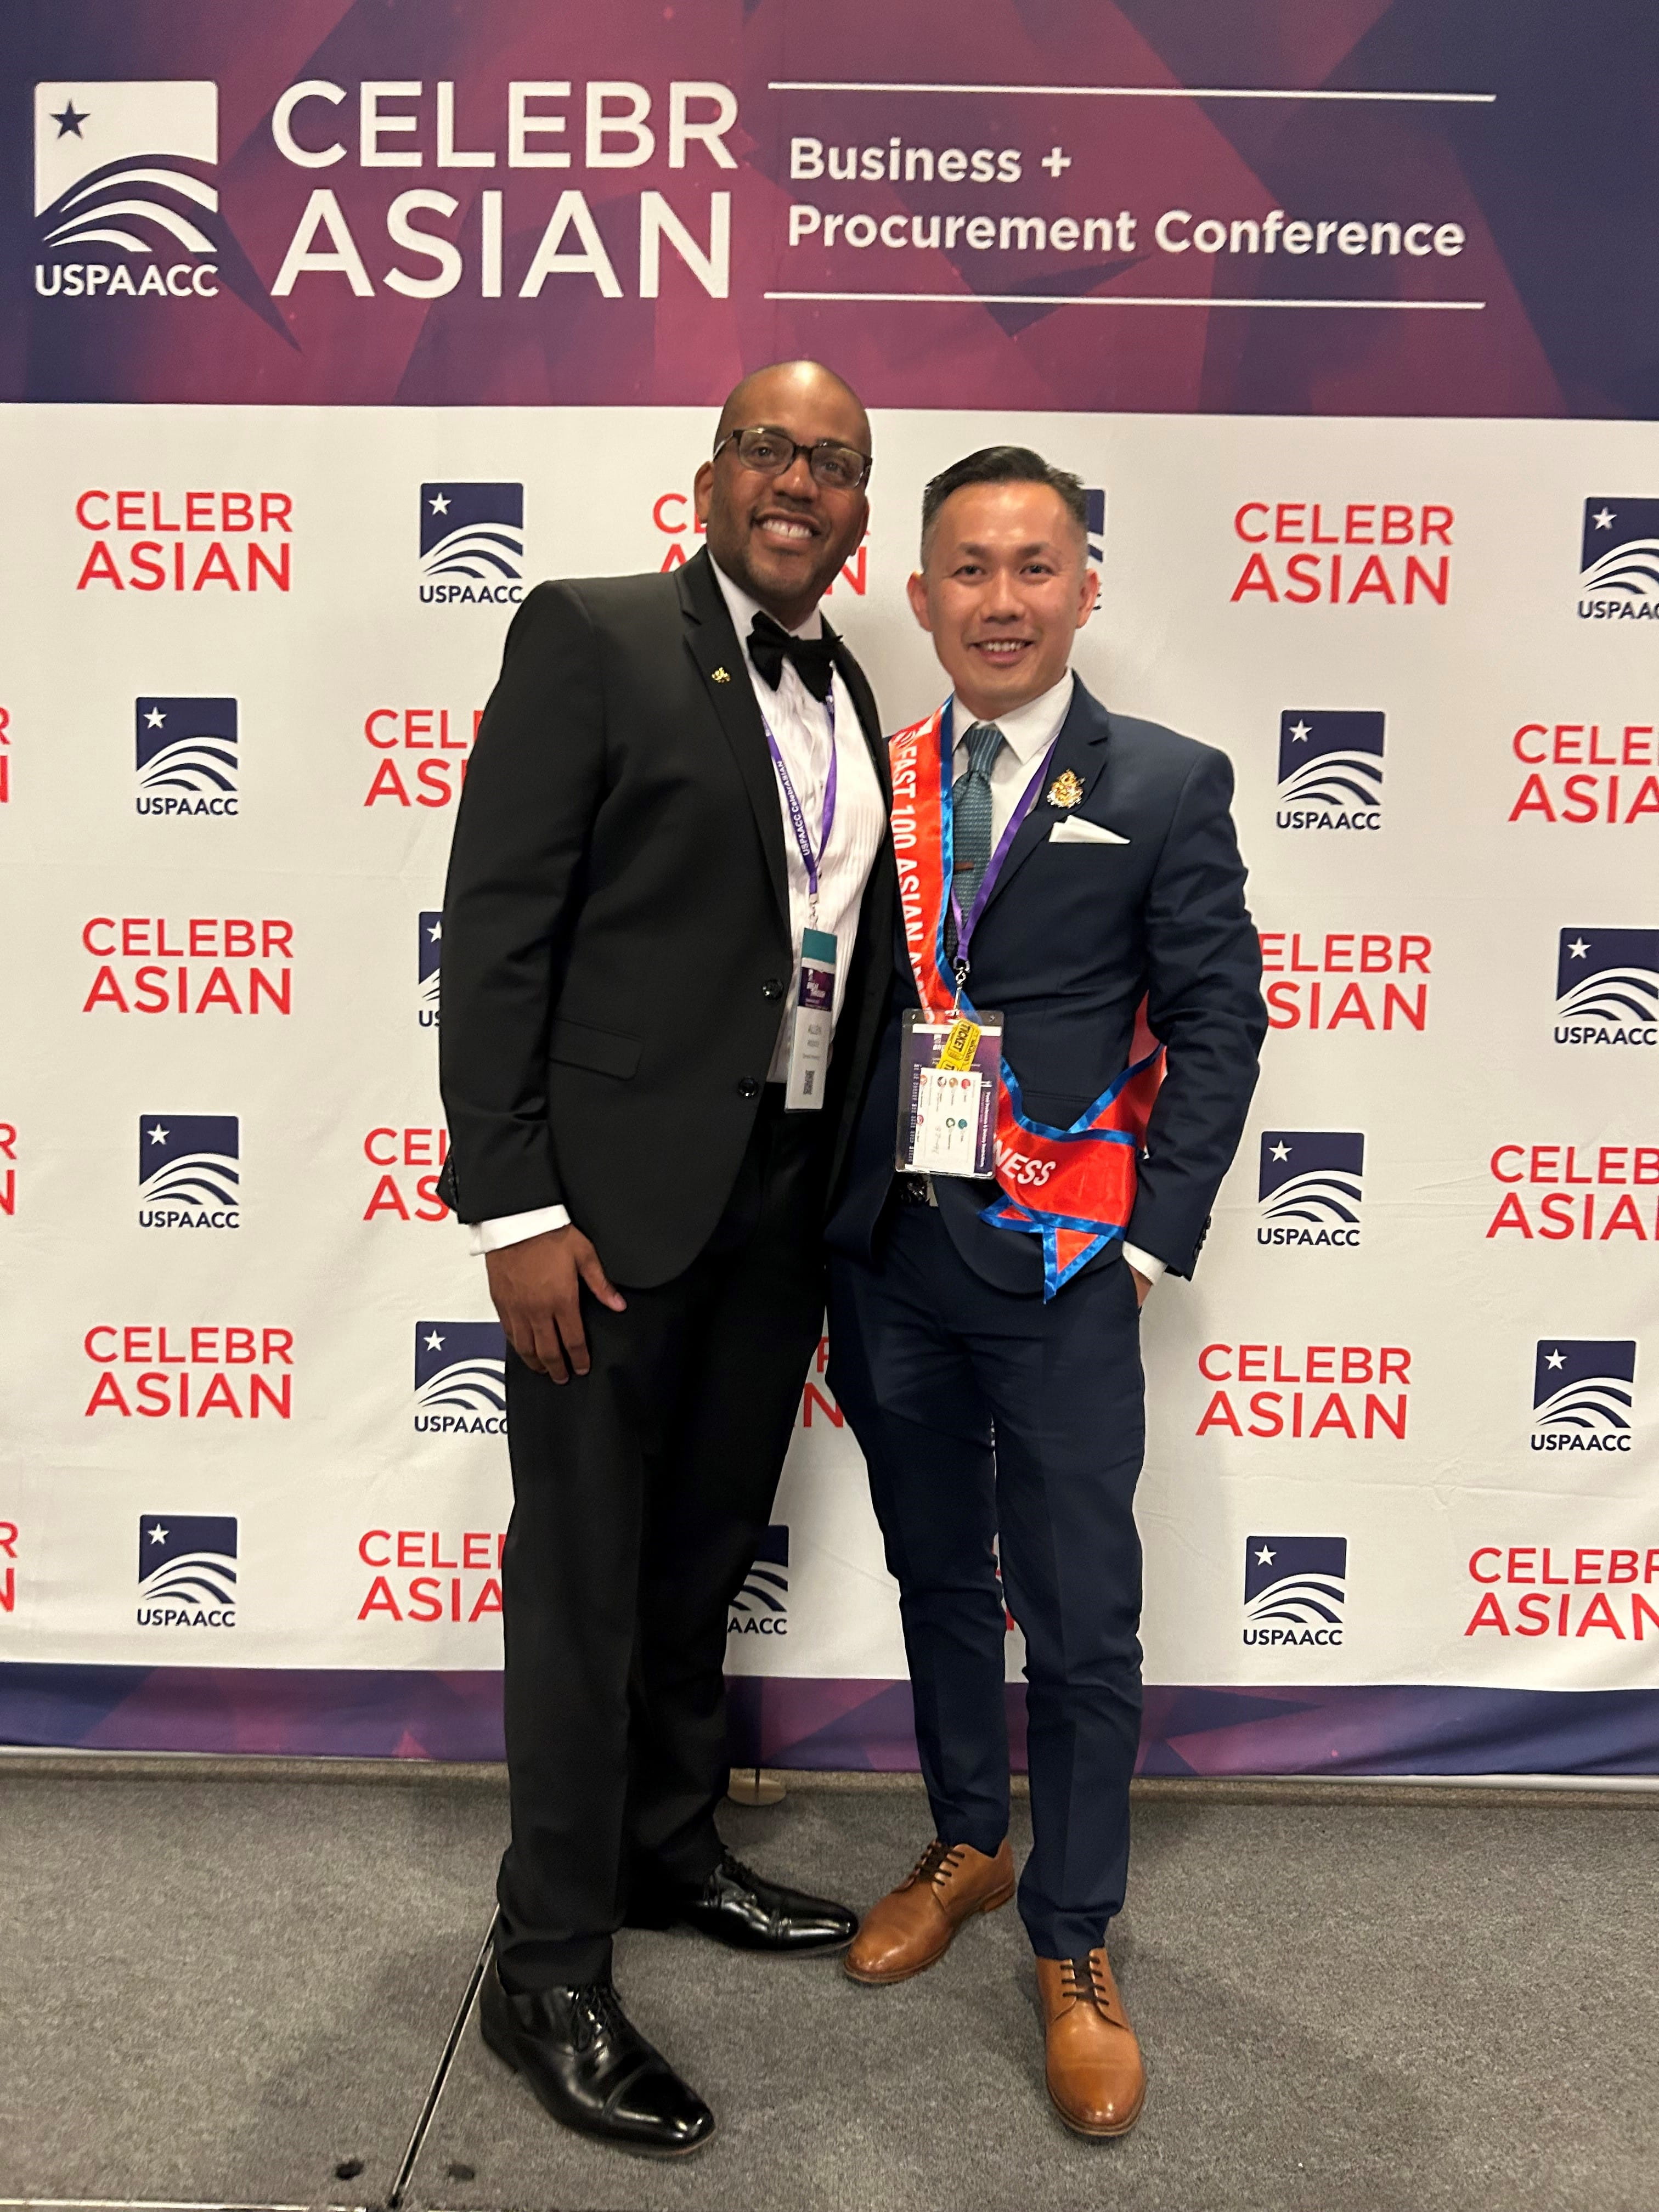 A Black man in a suit stands next to an Asian man in a suit with a red sash in front of a ppanel that reads "CelebrAsian."